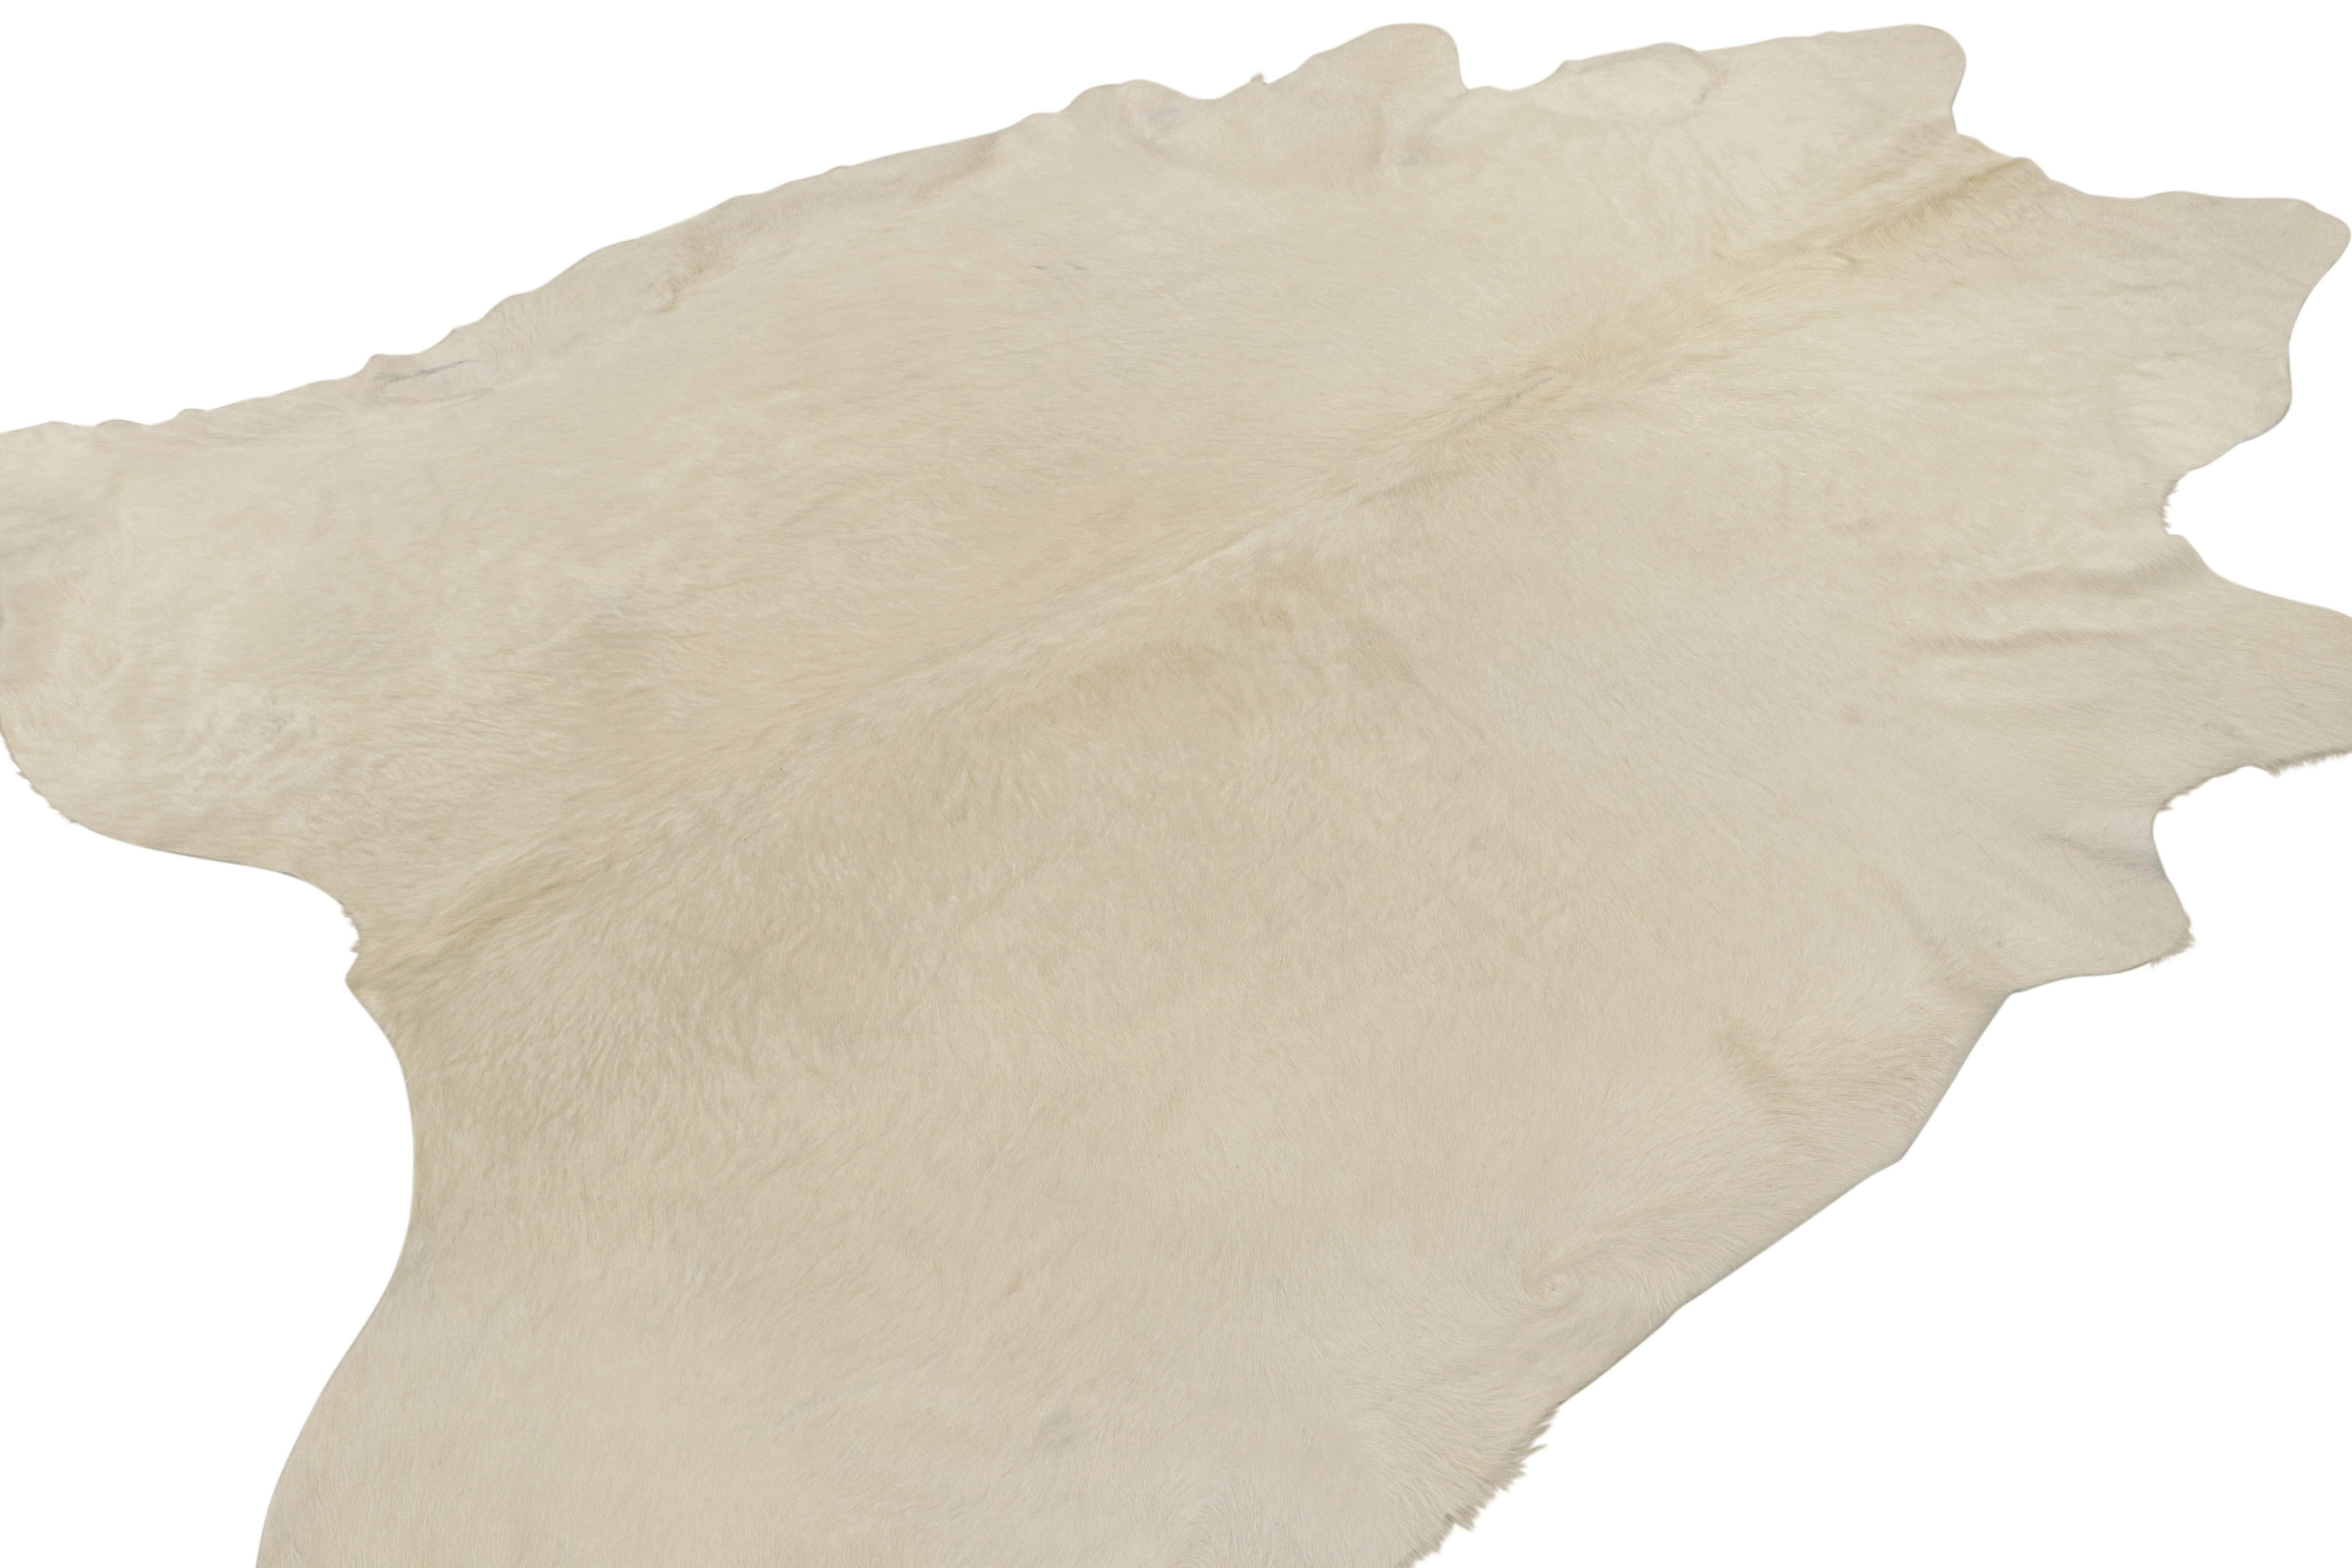 This 7x9 contemporary cowhide rug, originating from Brazil, is a comfortable and stylish addition to wide range of spaces for its unique shape inherent to the craft. 

On the Design: 

Admirers of the craft may appreciate this new cowhide rug made